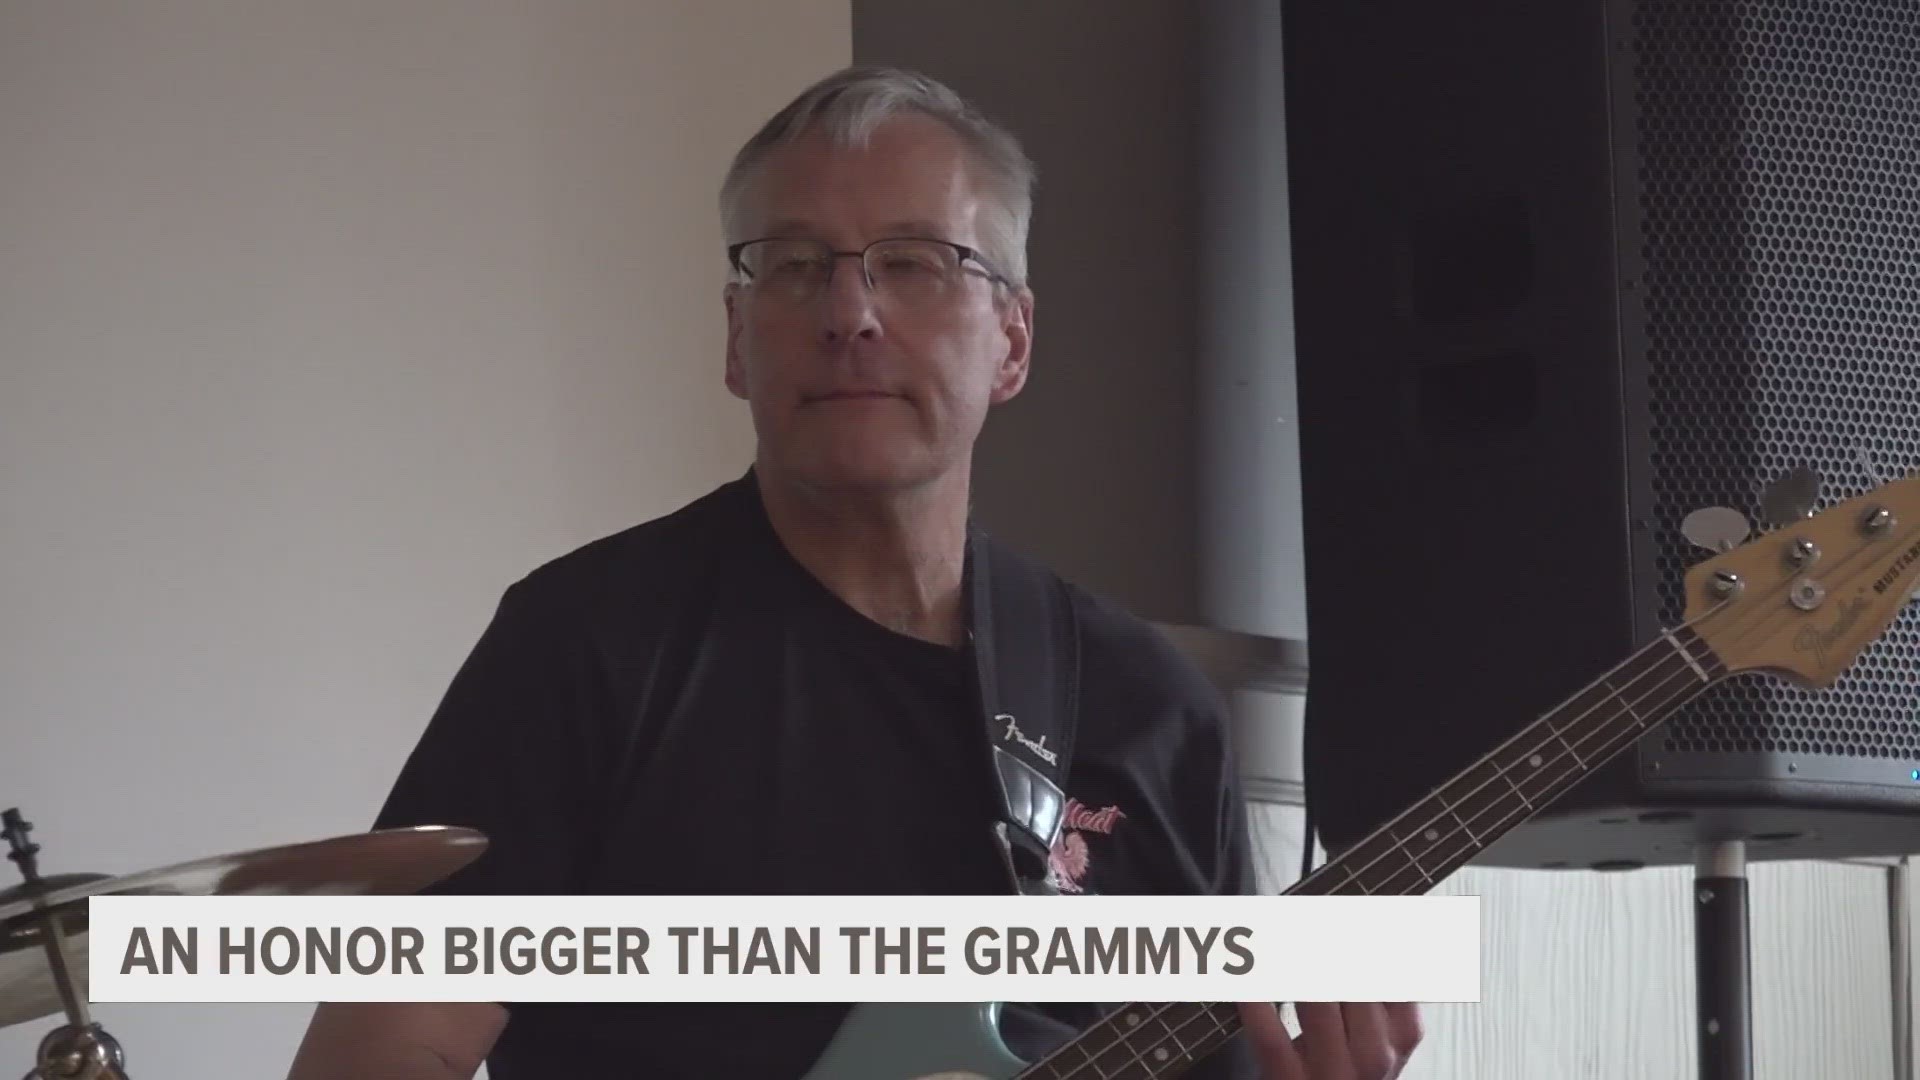 David Kurdziel, a bass guitarist with Gerry Kaminski's Polka Network, recently learned he has earned an award that he calls "icing on the cake" for his career.